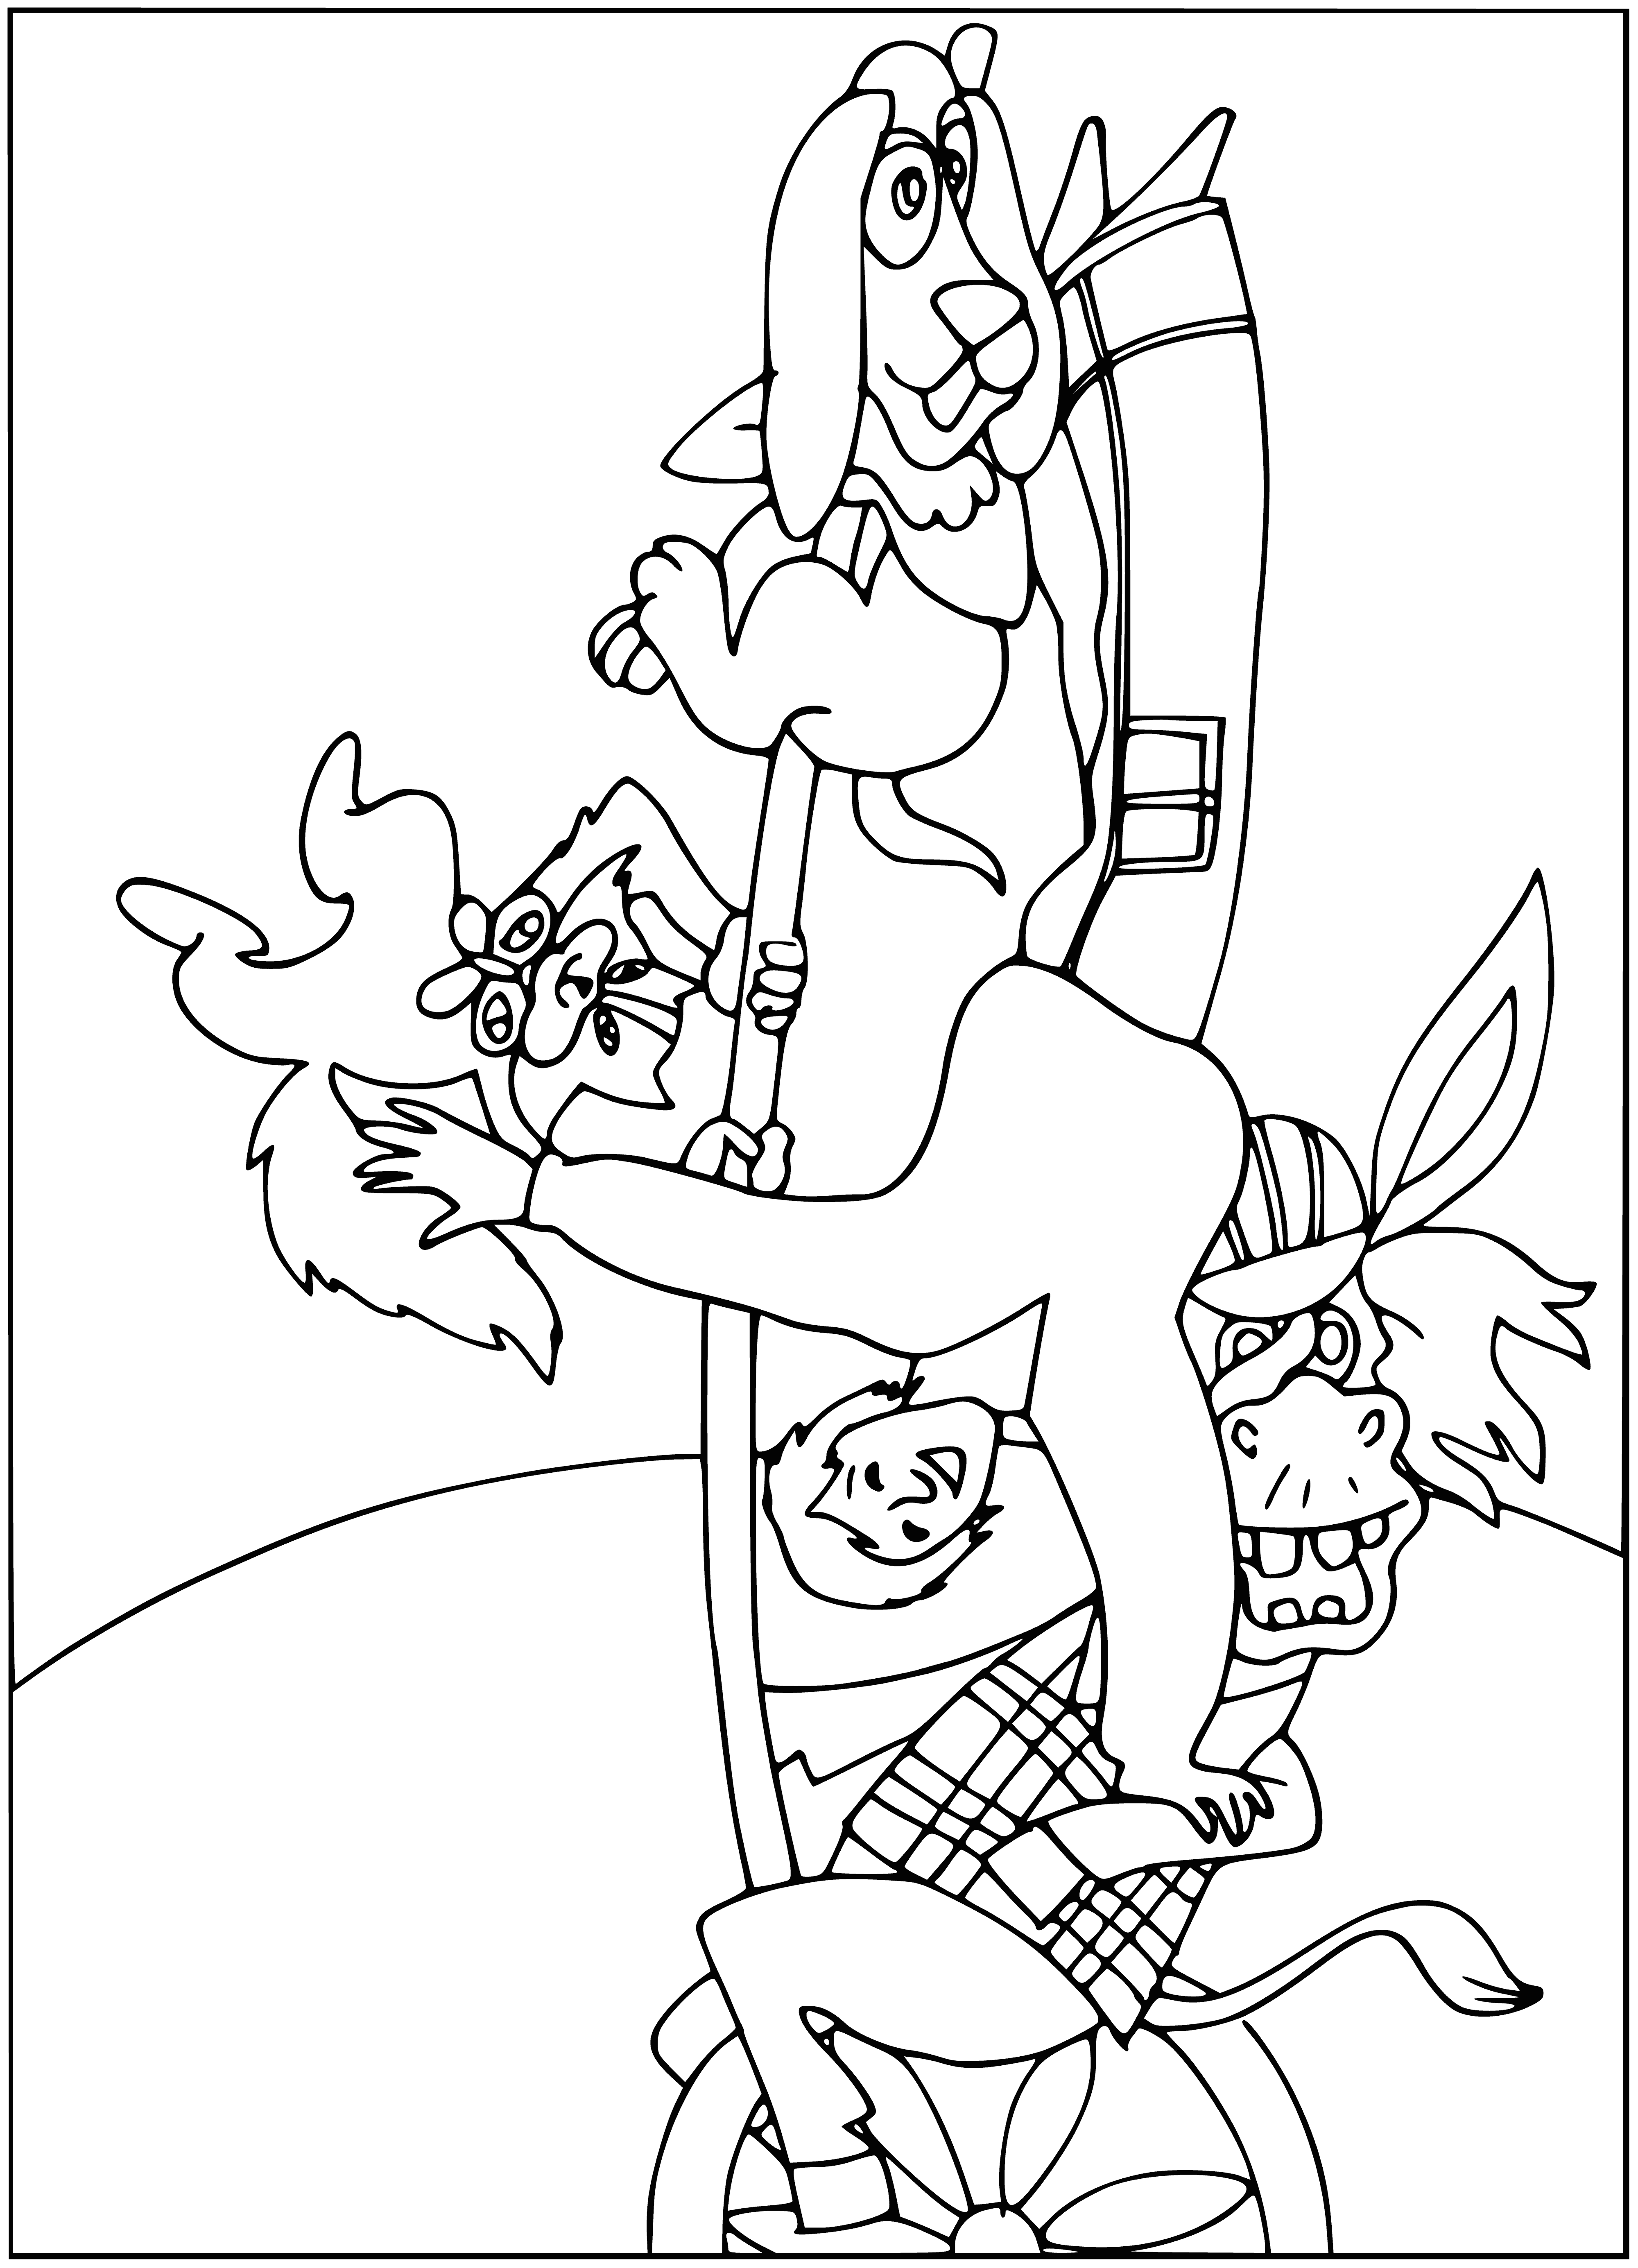 coloring page: Animals enjoy sunbathing on the steps of a pyramid: donkey, dog, cat, and rooster.